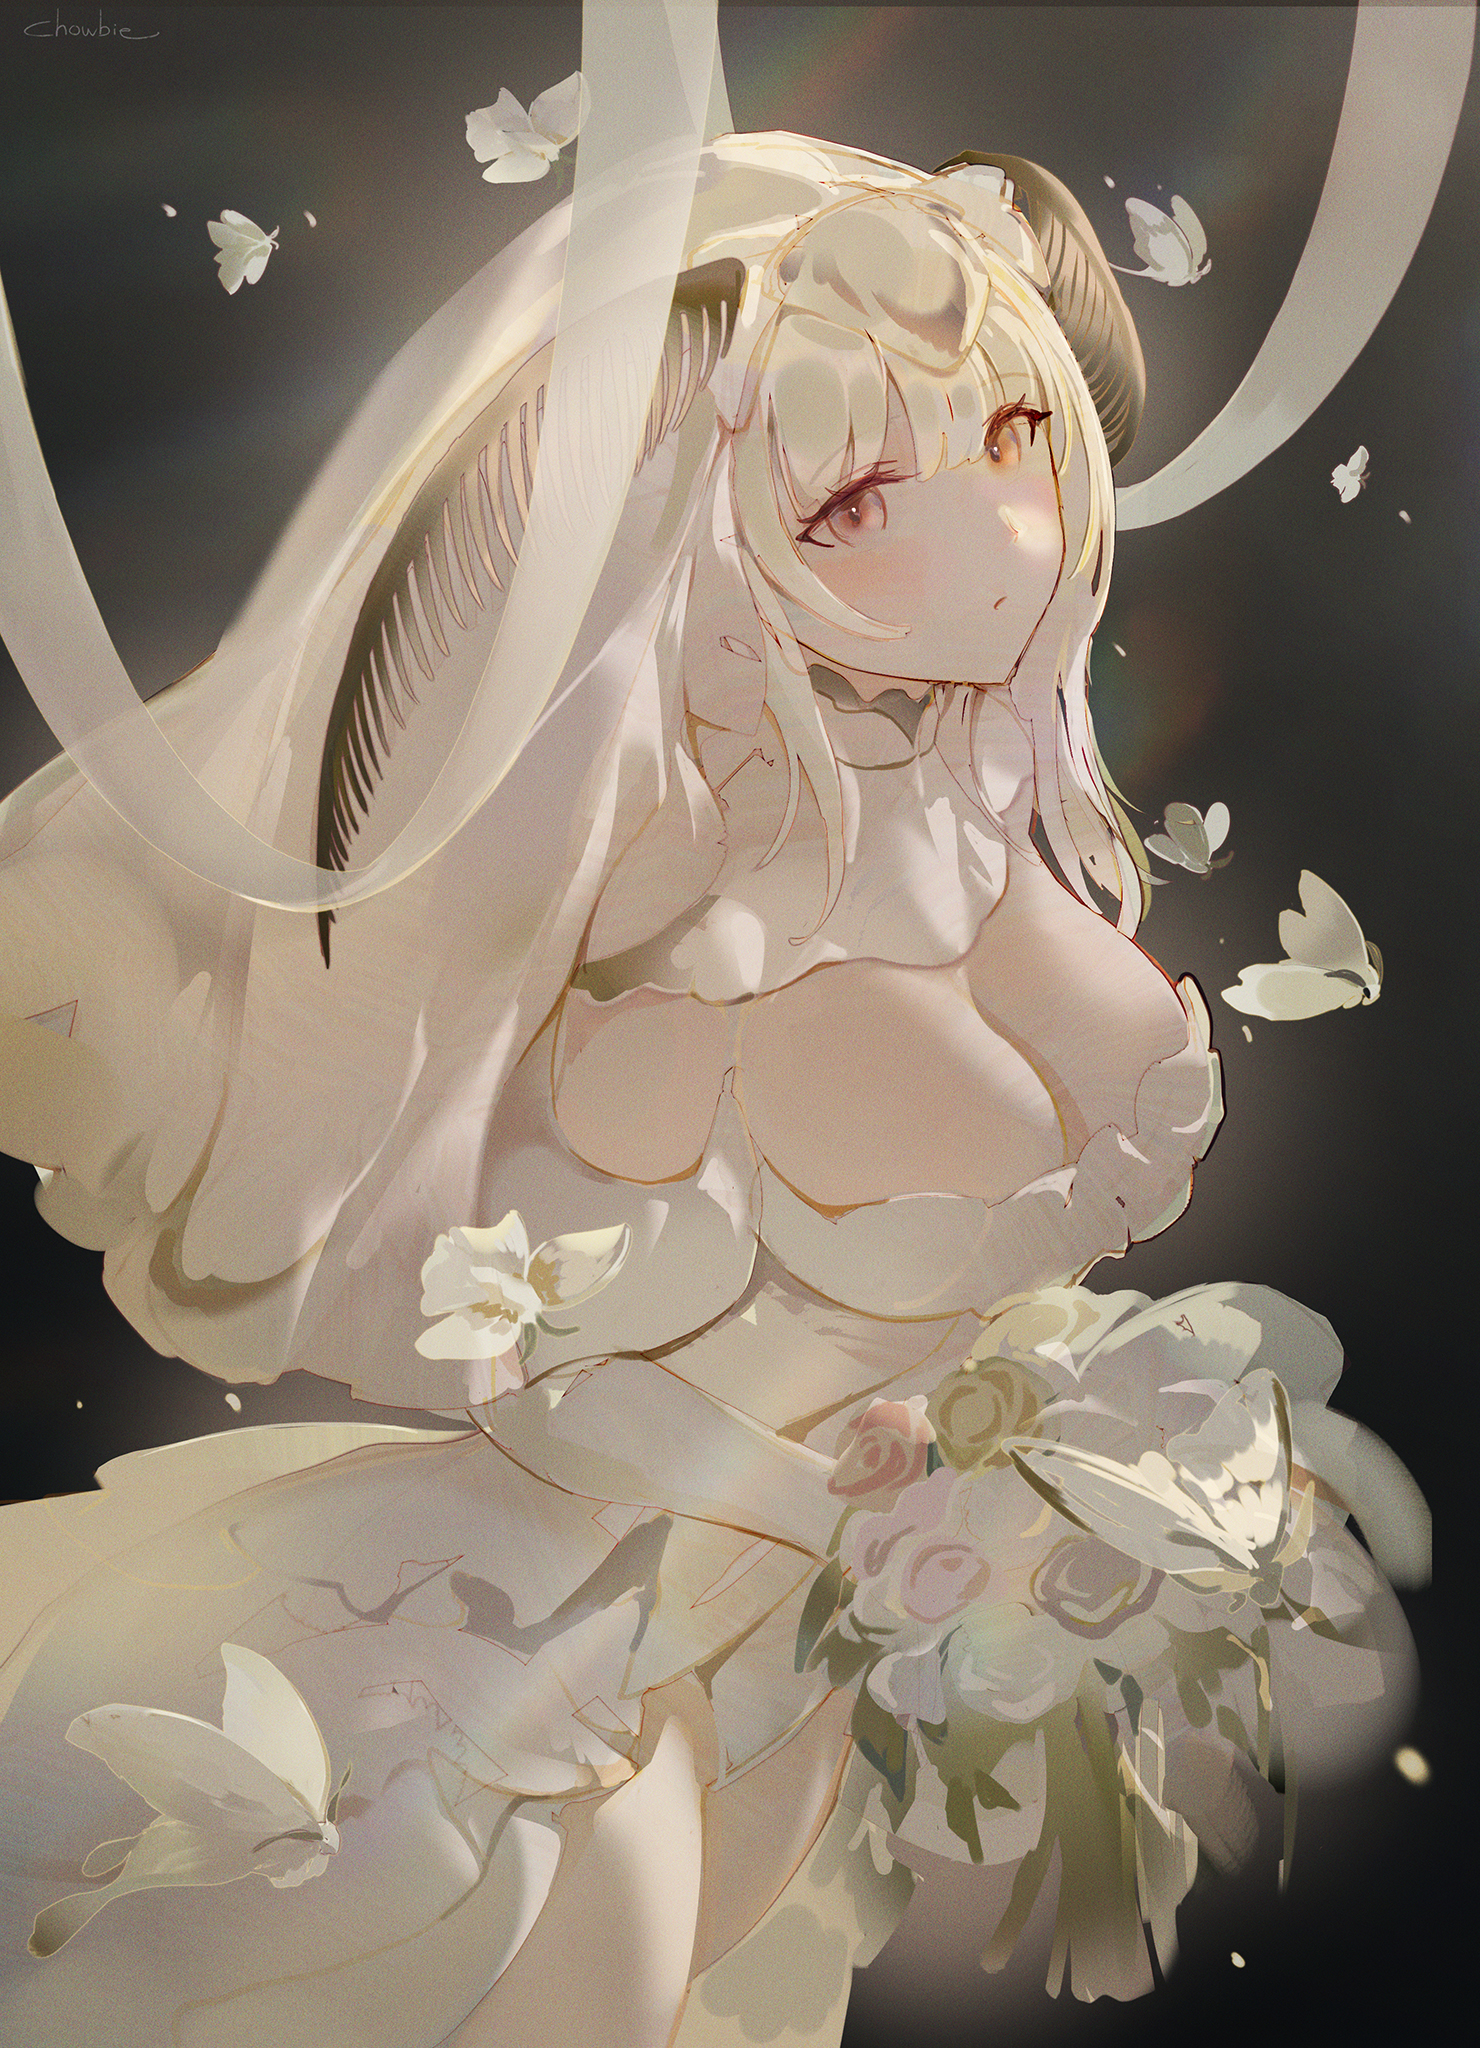 Anime 1480x2048 anime anime girls cleavage blonde big boobs petals flowers dress artwork chowbie wedding dress white dress weddings moths blushing veils insect butterfly bouquets white ribbon ribbon